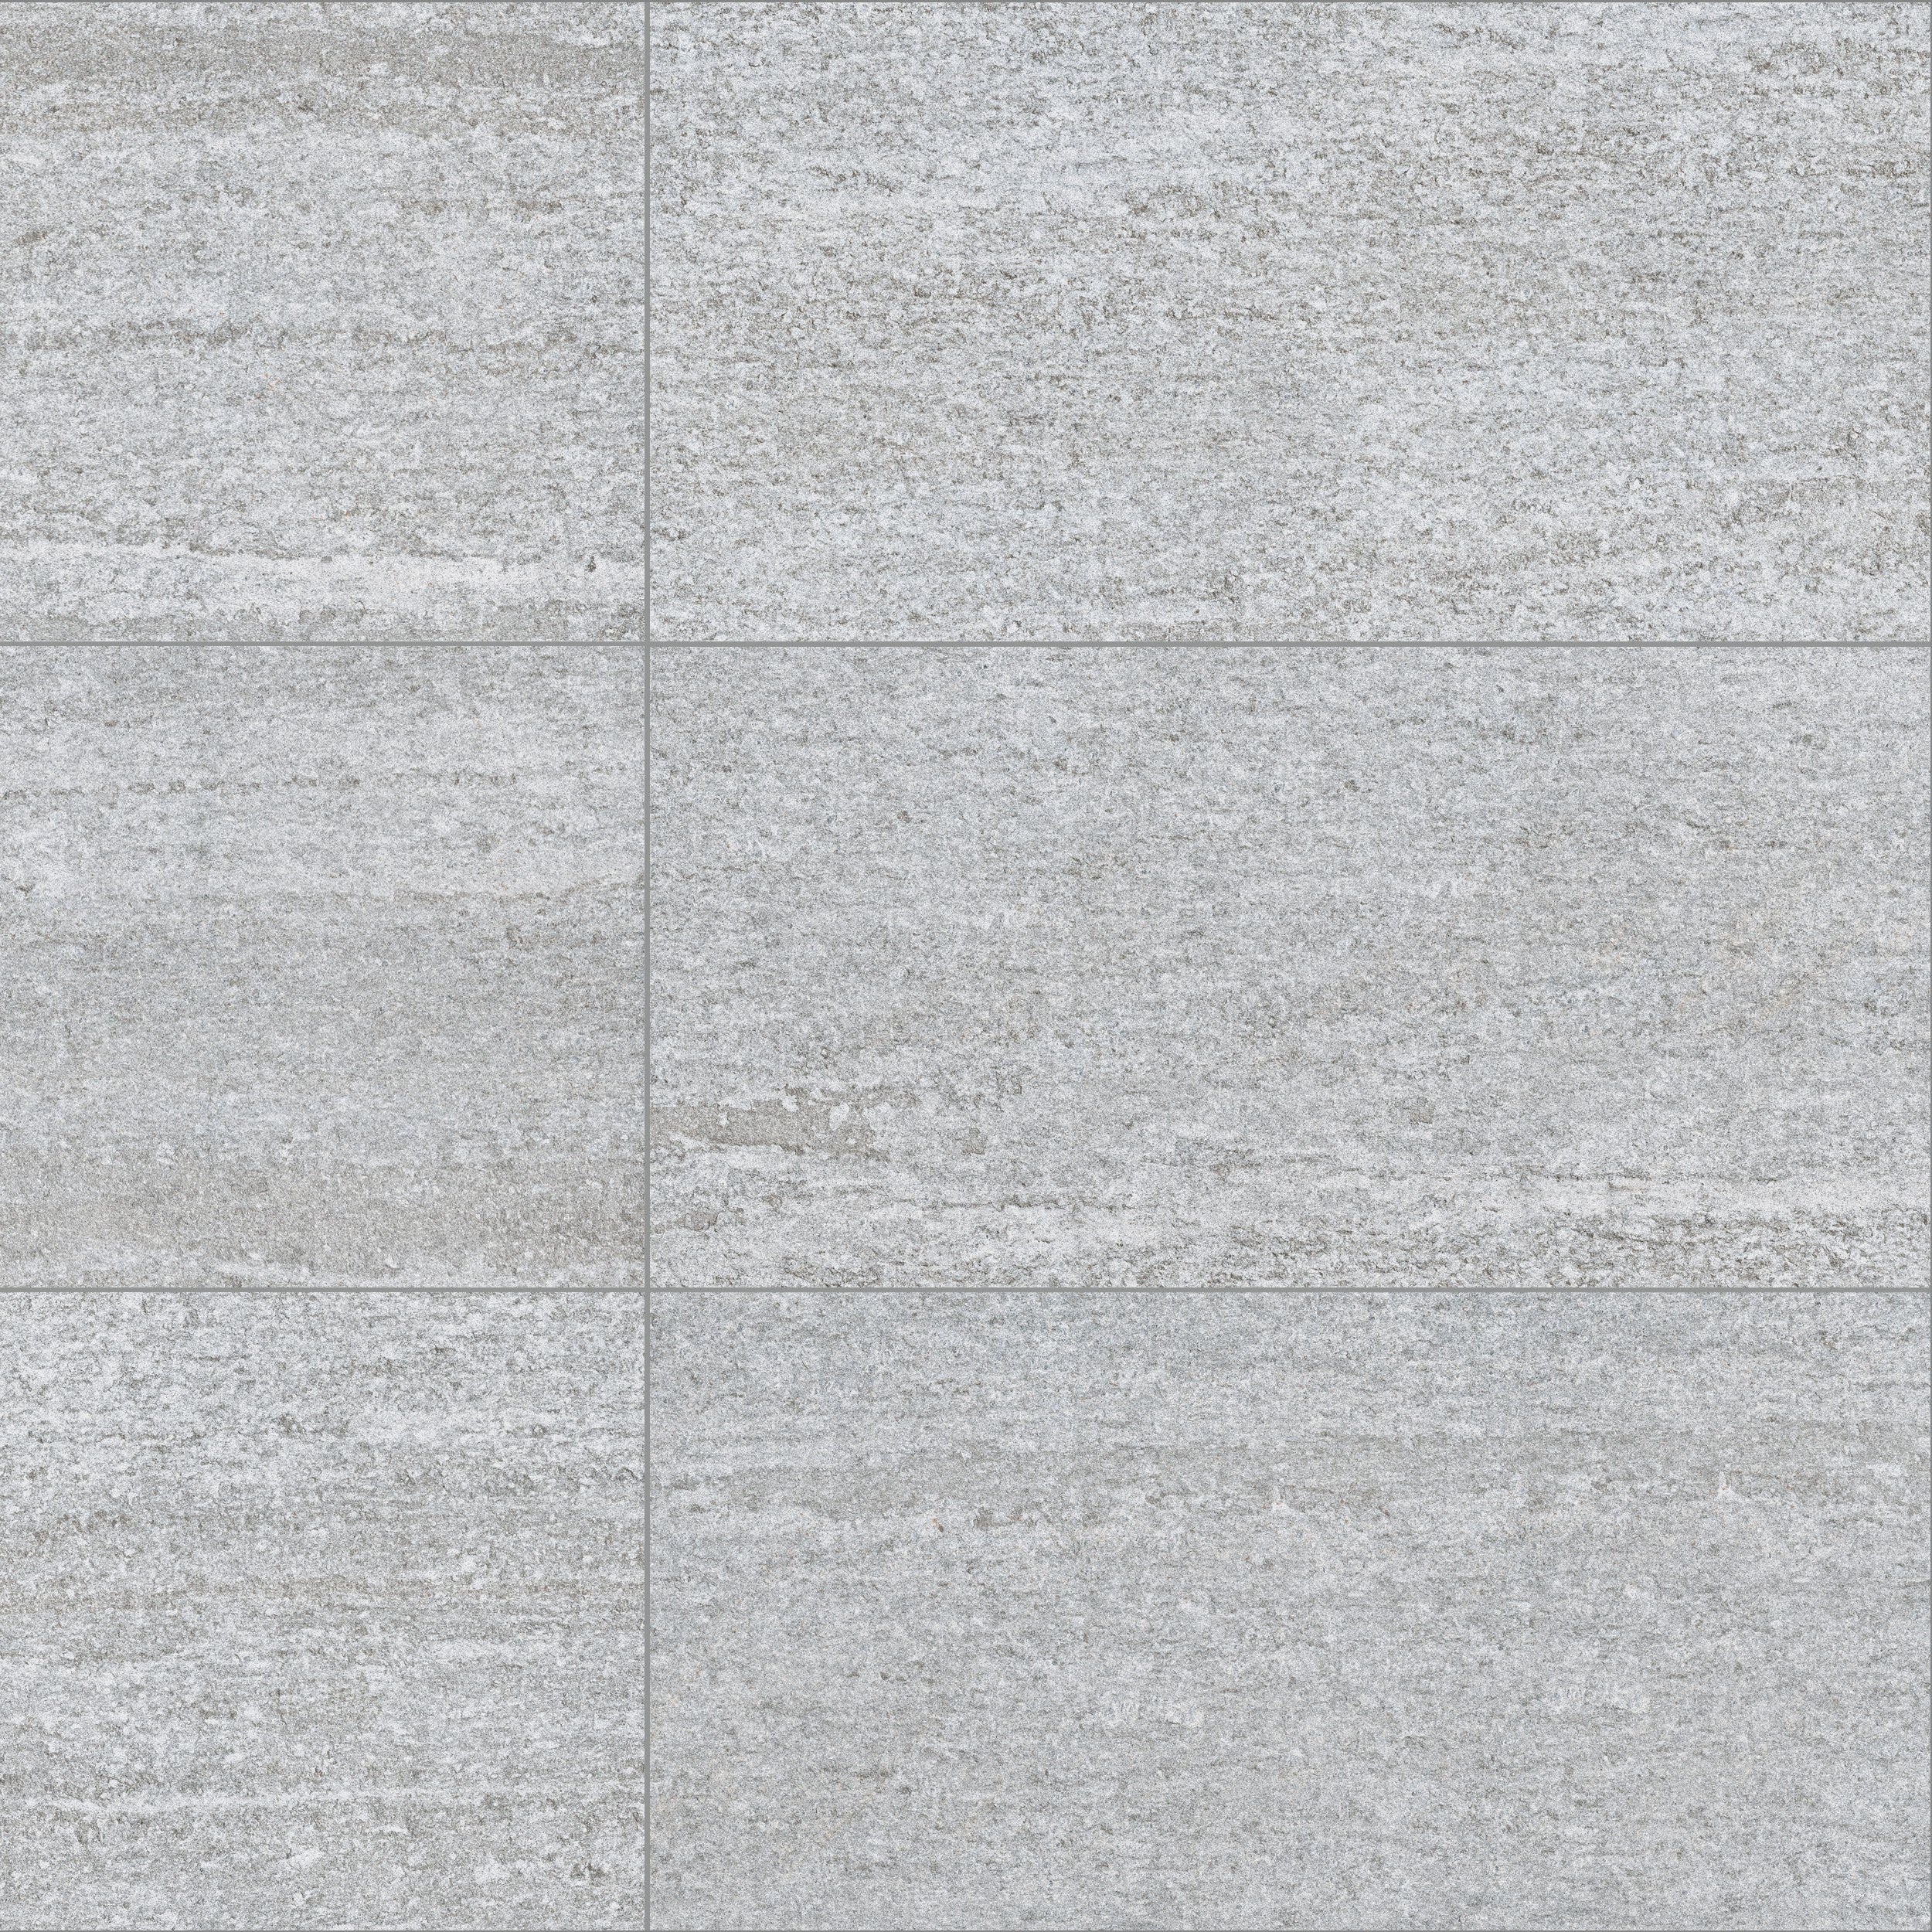 surface group international frontier 20 porcelain paving tile stone pietra di bagnolo 18x36 for outdoor application manufactured by landmark